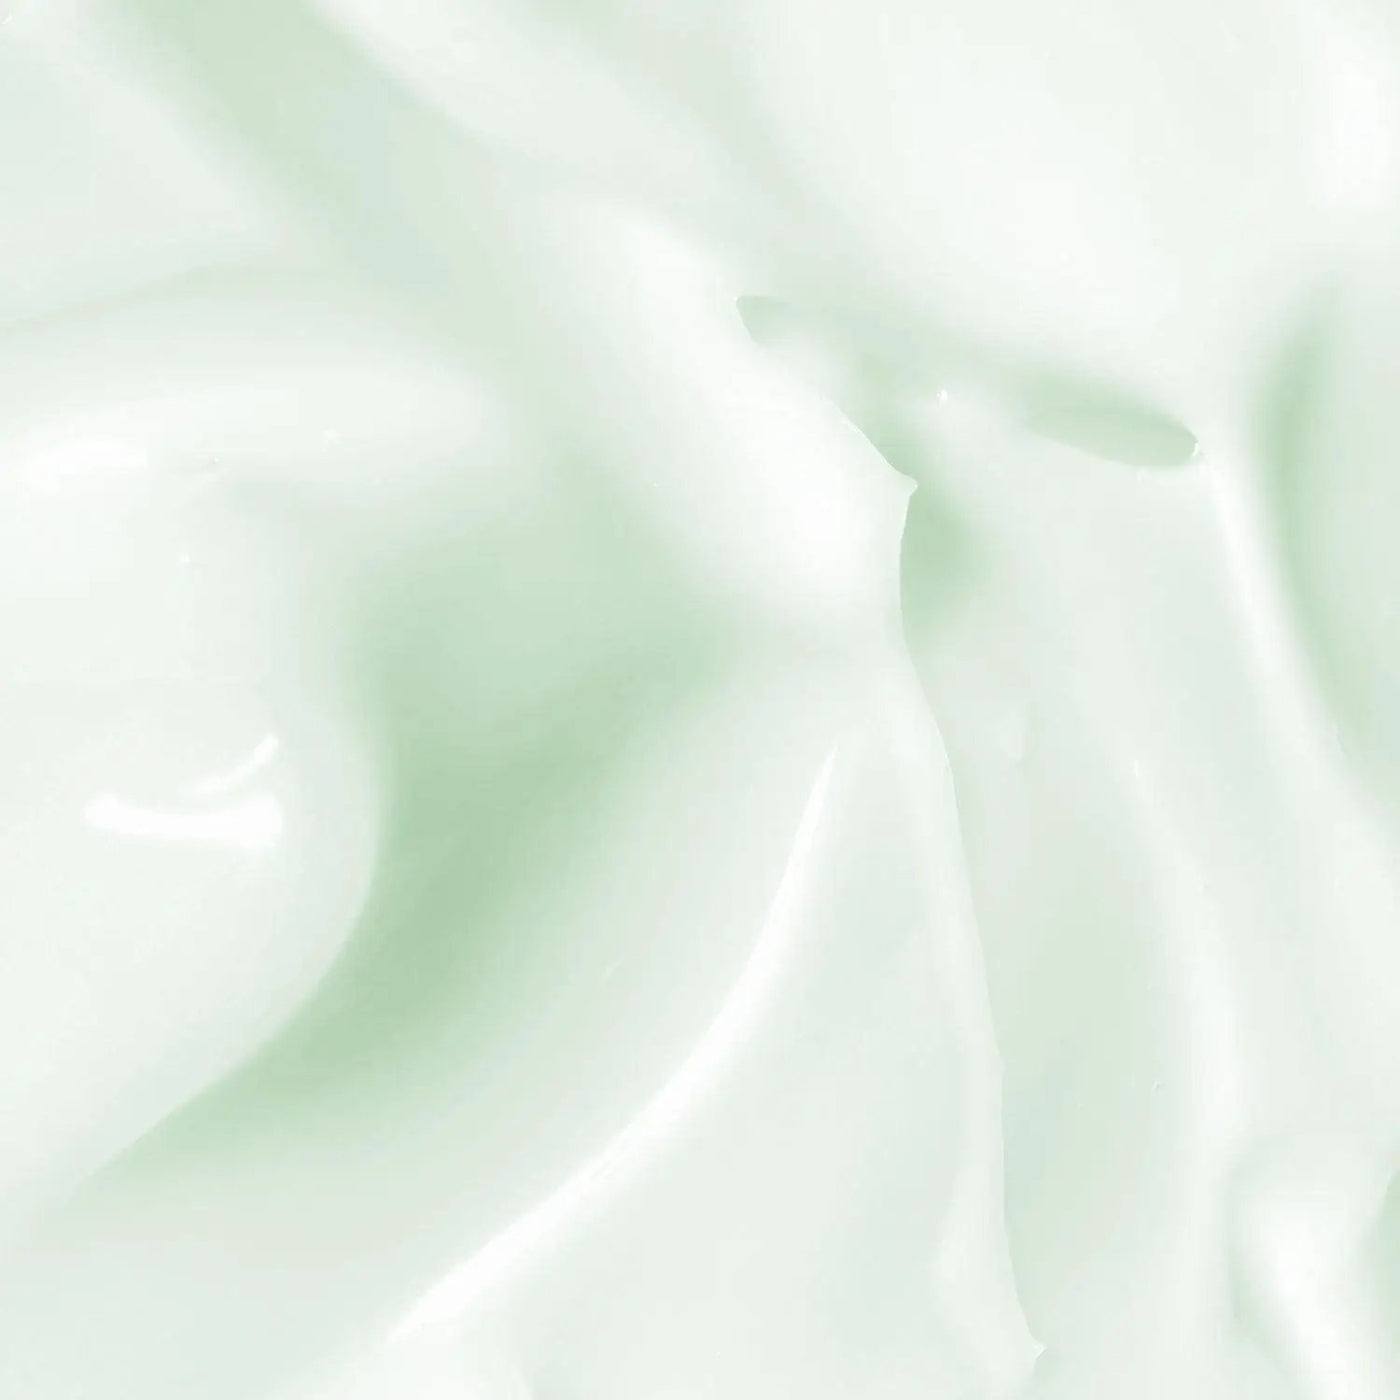 A swatch of the AntiBeauty Reveal Regulating Moisturizer, showing its light milky texture and hydrating properties for oily and acne prone skin.